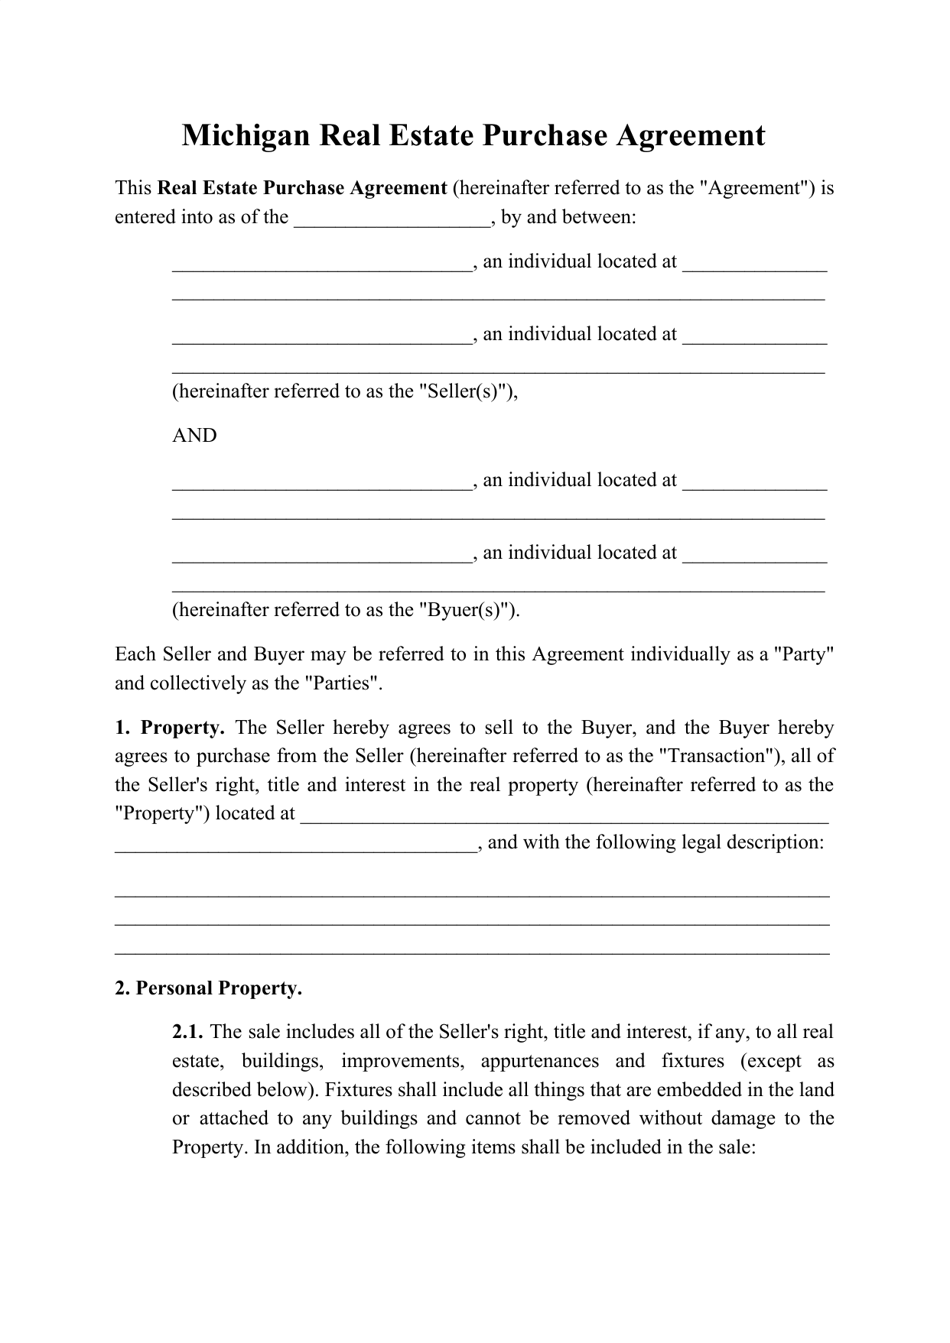 Real Estate Purchase Agreement Template - Michigan, Page 1